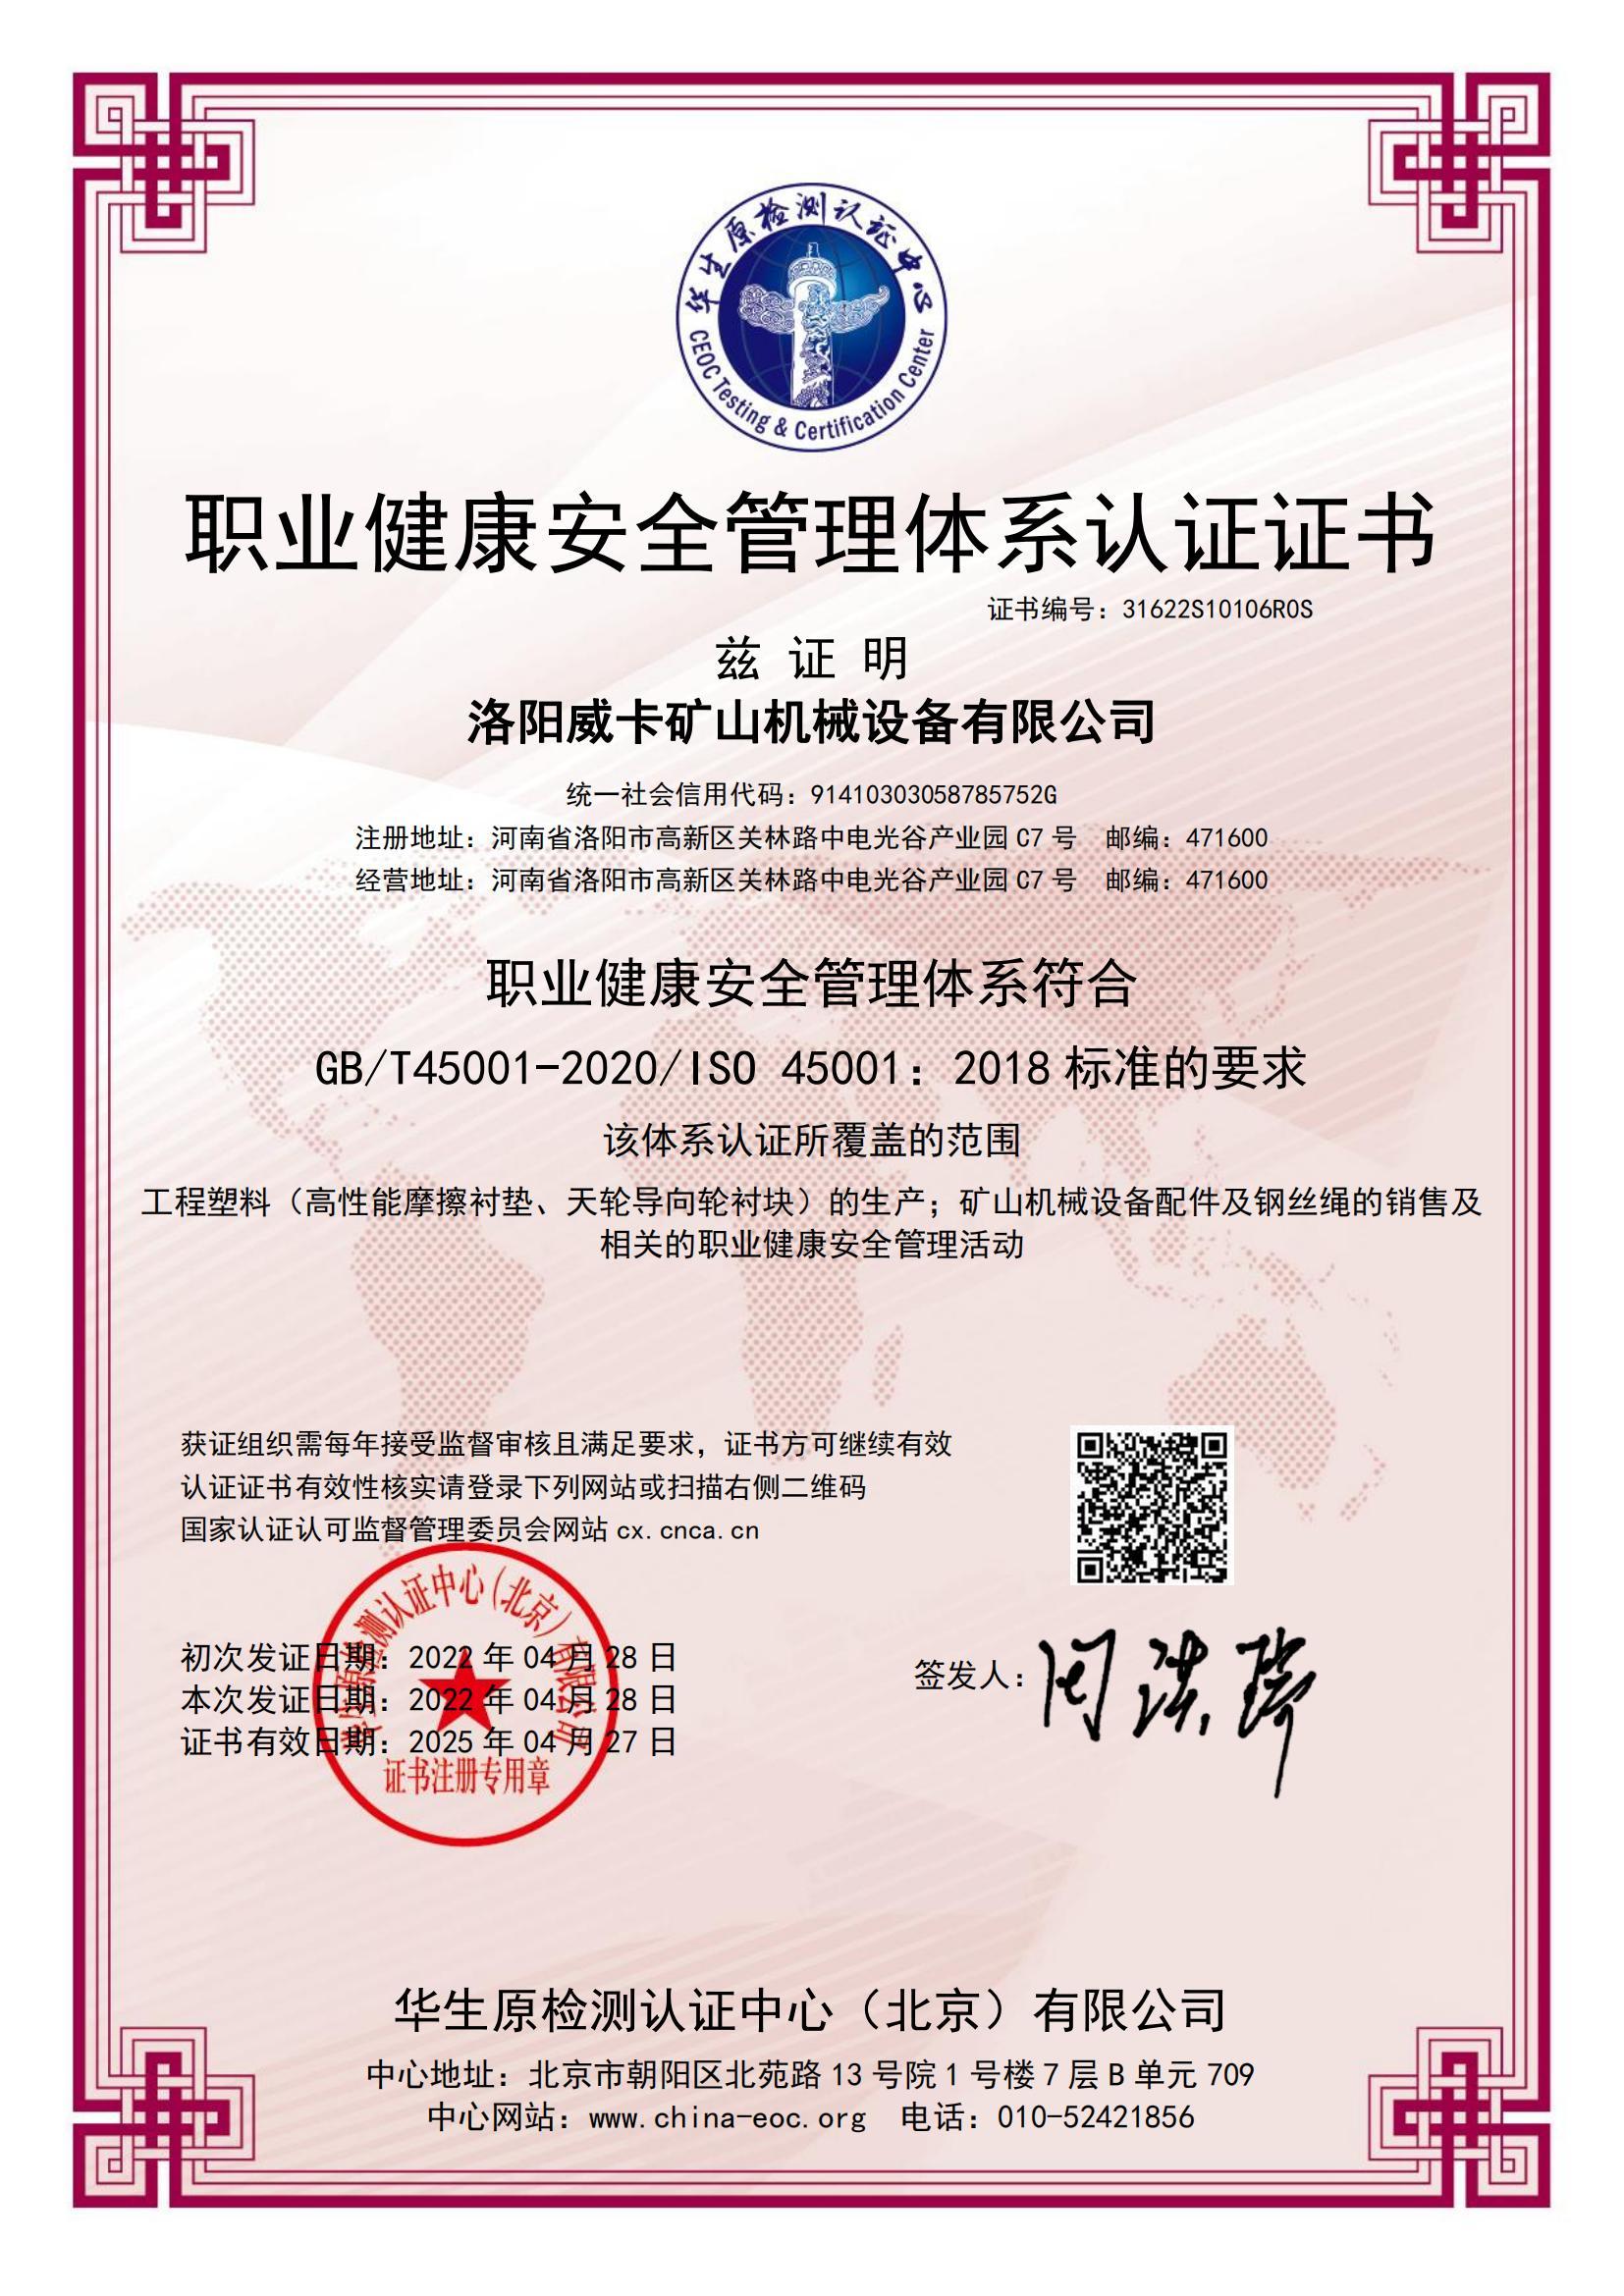 Luoyang Weika Mining Machinery Equipment Co., Ltd. passed the ISO45001 occupational health and safety management system certification on April 28, 2022.